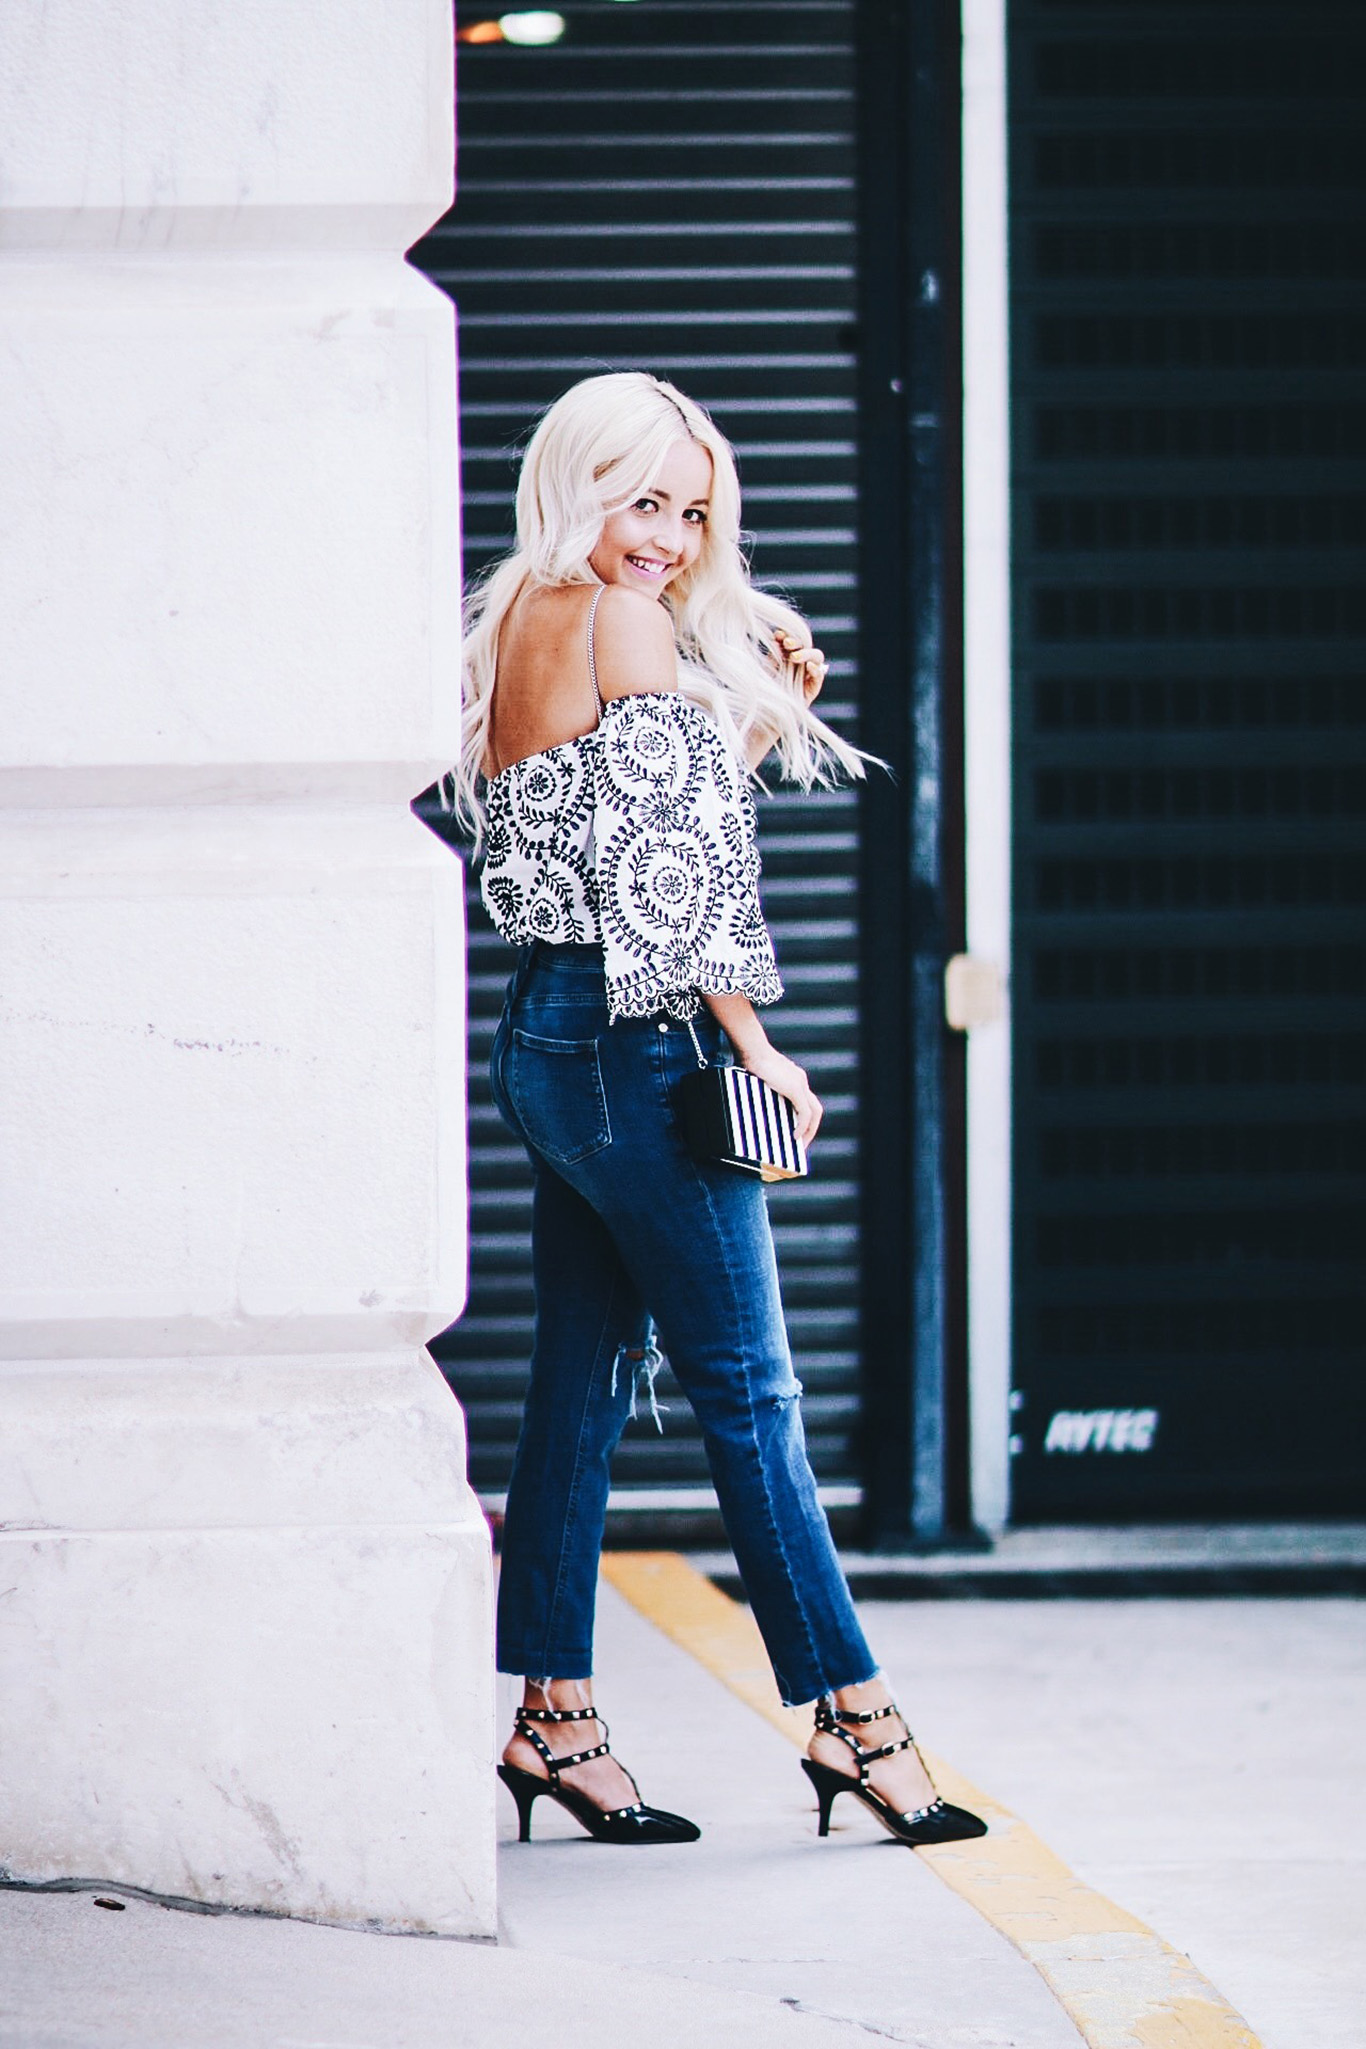 Alena Gidenko of modaprints.com styles an off the shoulder printed top with boyfriend jeans and studded black heels